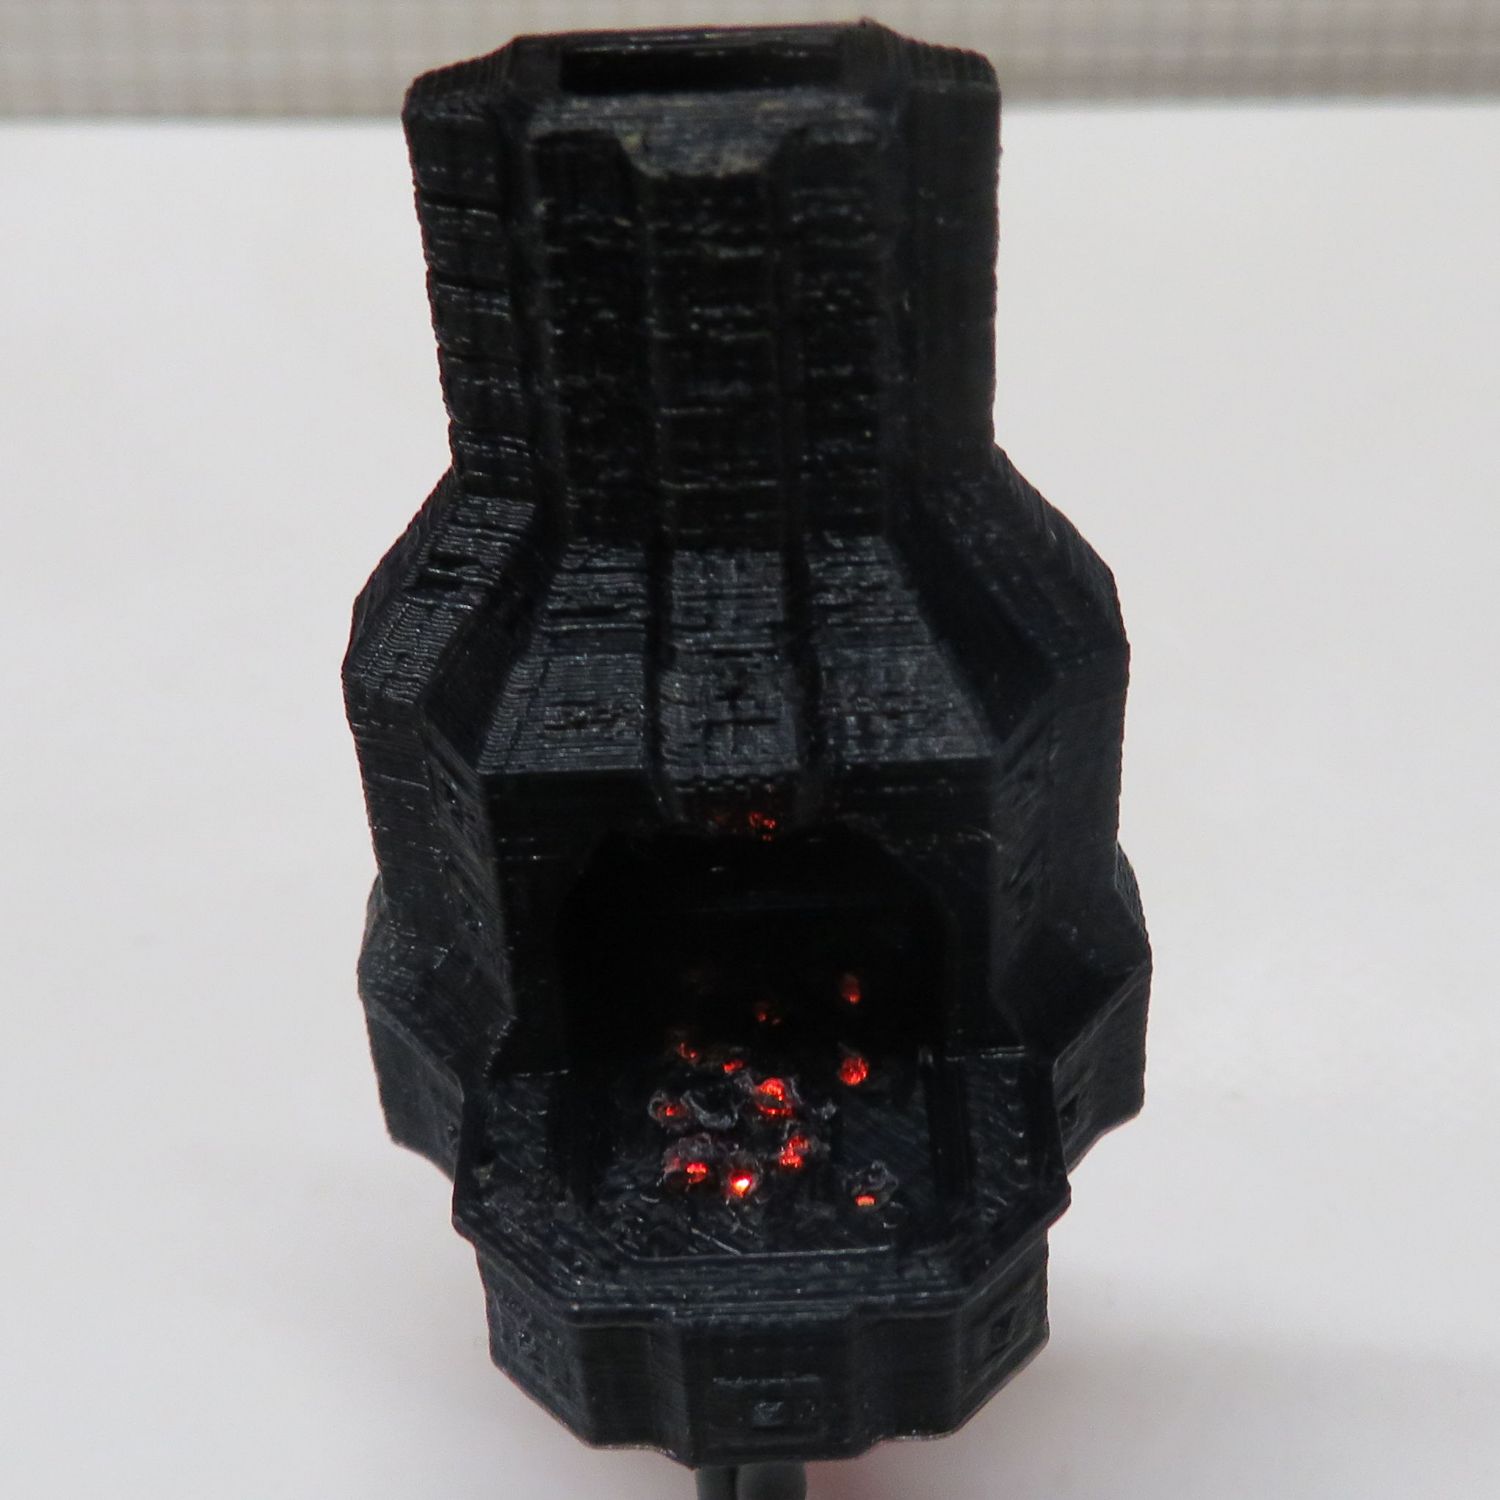 OO Scale Blacksmith's Forge with Flickering LED